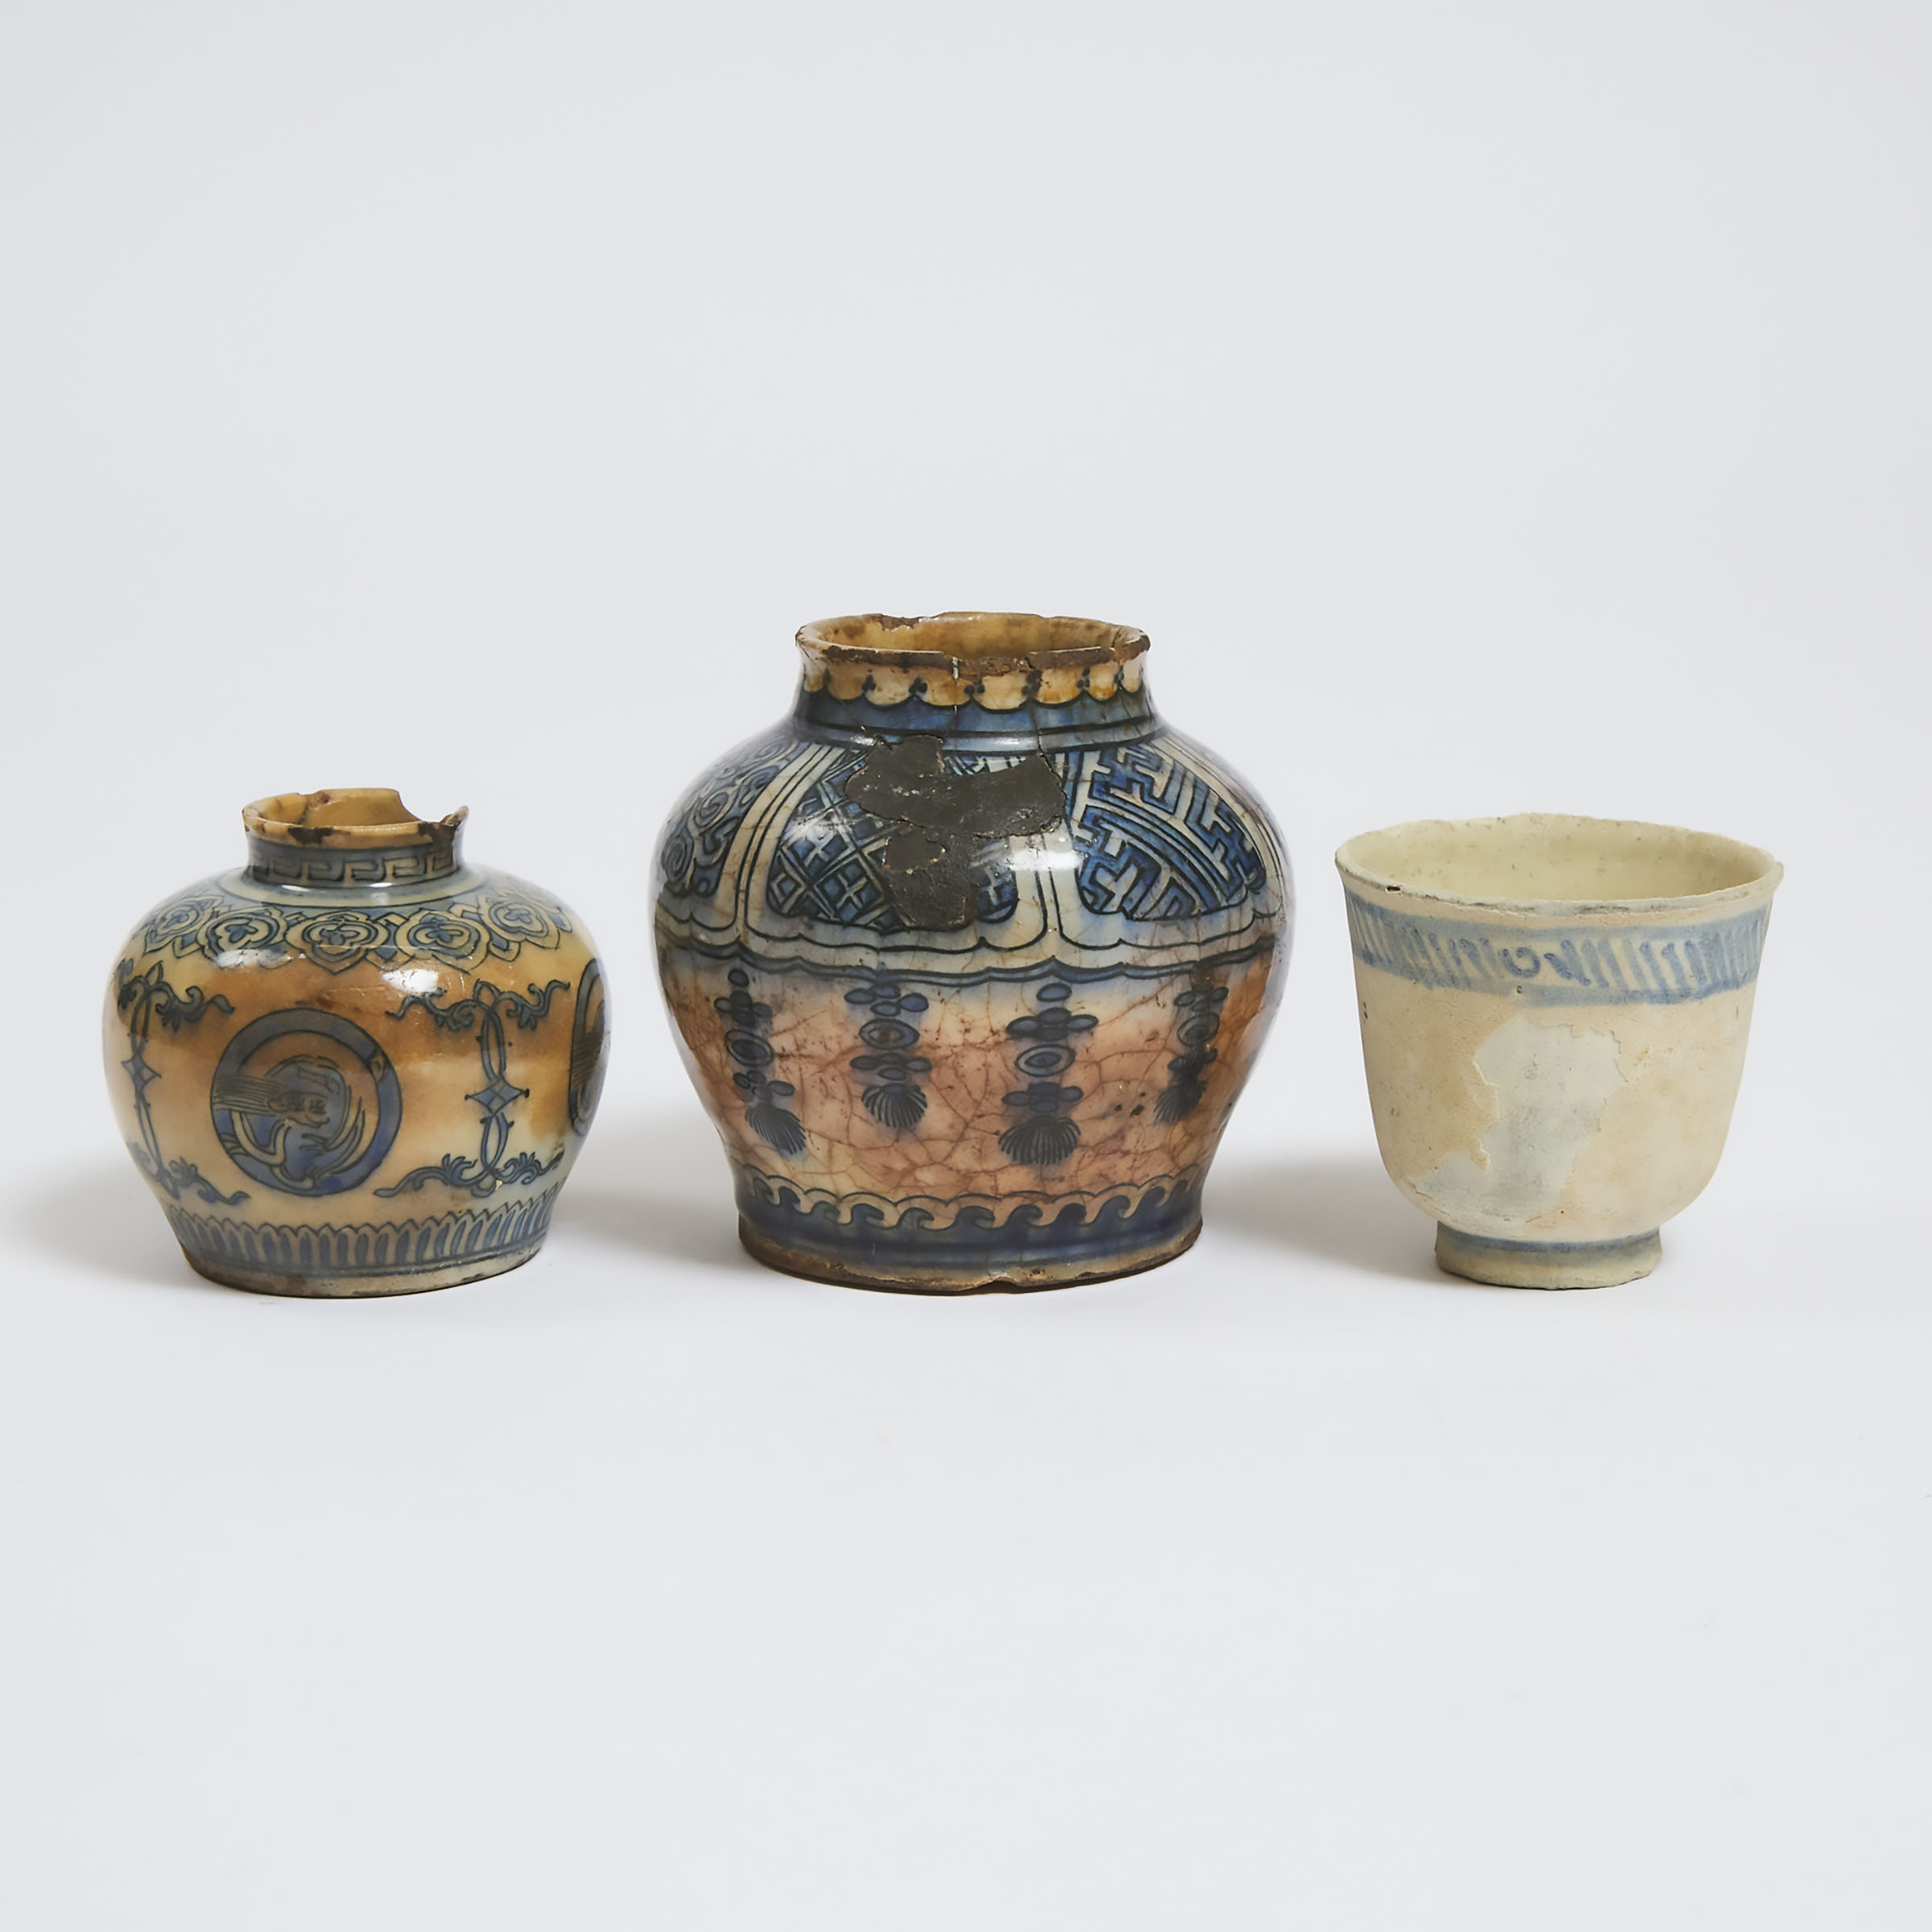 Two Safavid Blue and White Jars, 17th Century, Together With a Cup, 14th Century